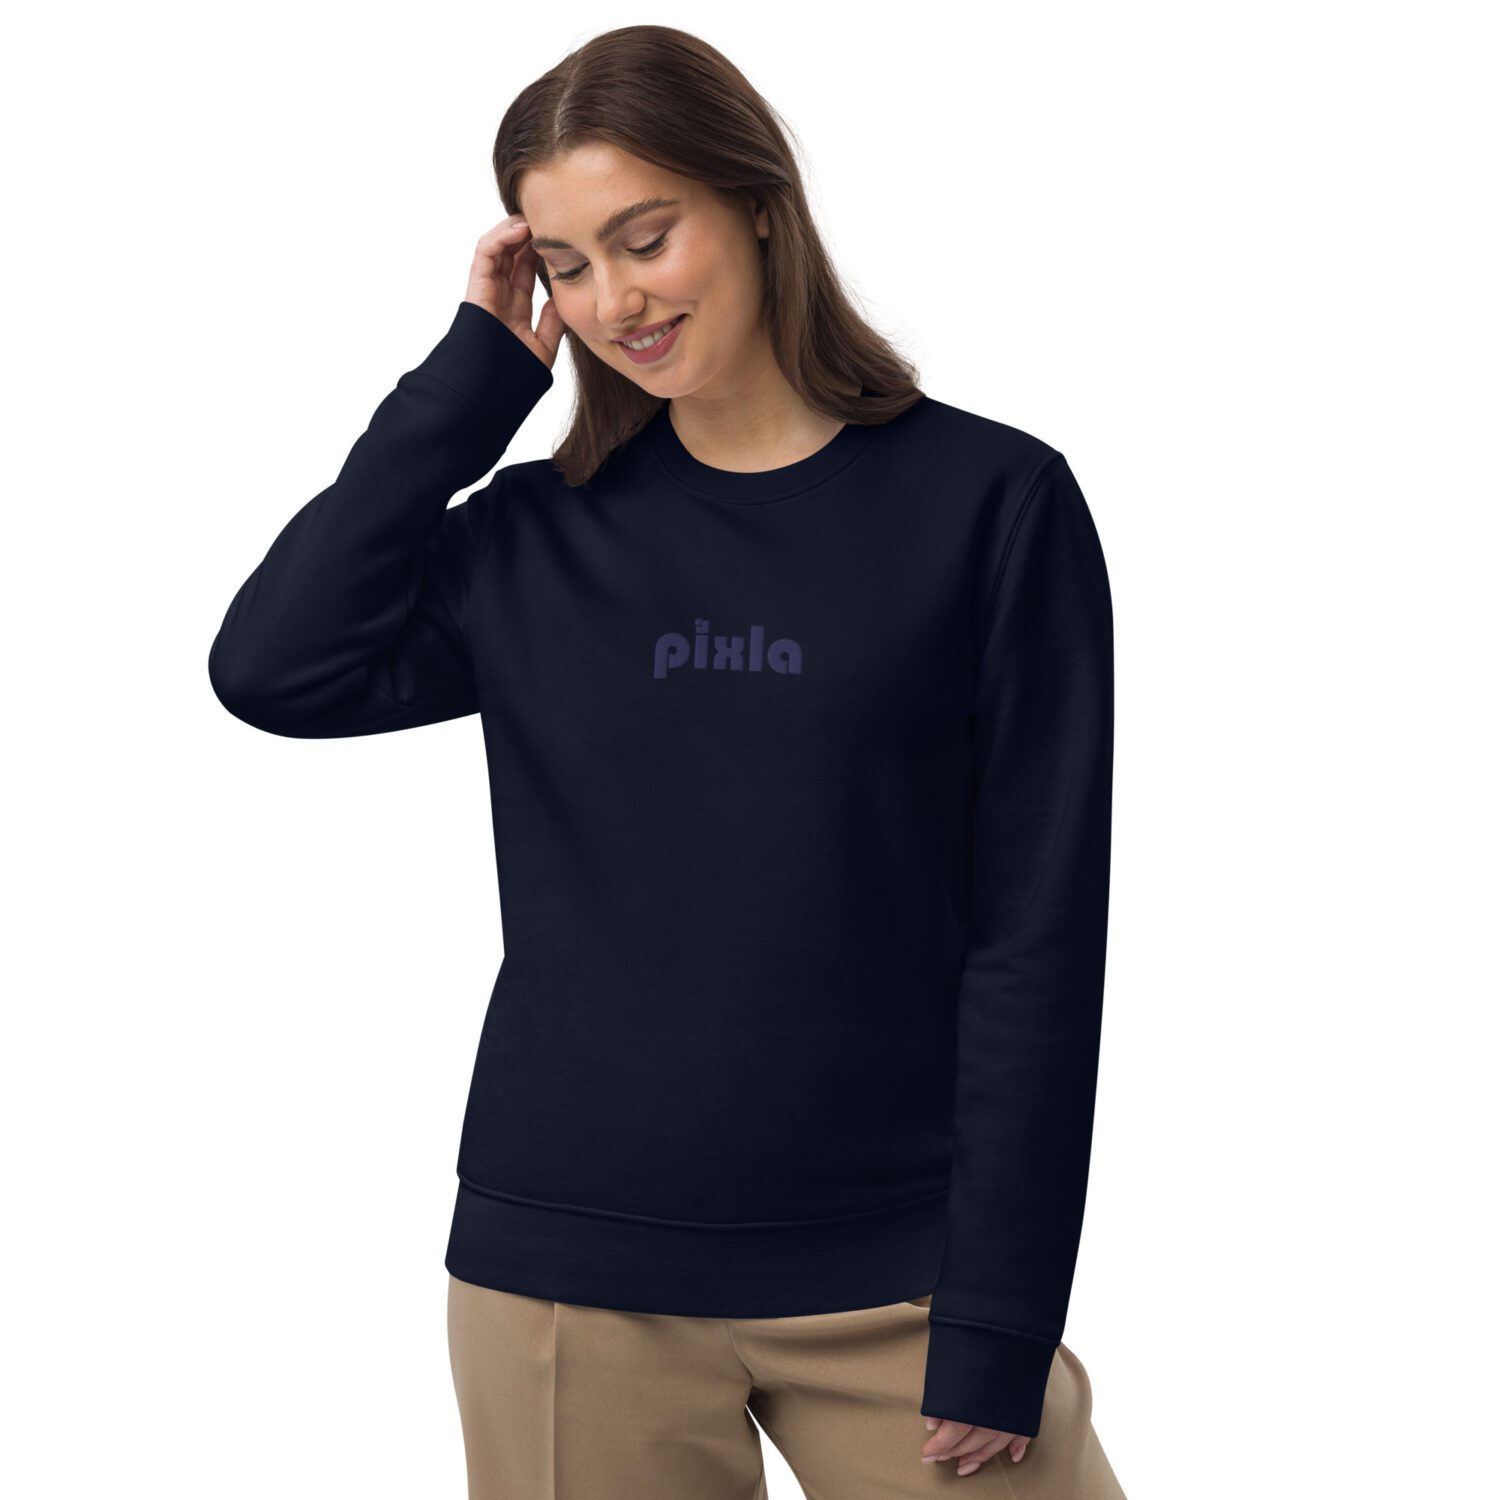 A classic slim-fit navy-on-navy premium sweatshirt with navy embroidery on the front chest. Made from organic ring-spun combed cotton and recycled polyester in medium-weight with a soft feel. Super soft fleece inside making it perfect for keeping warm.